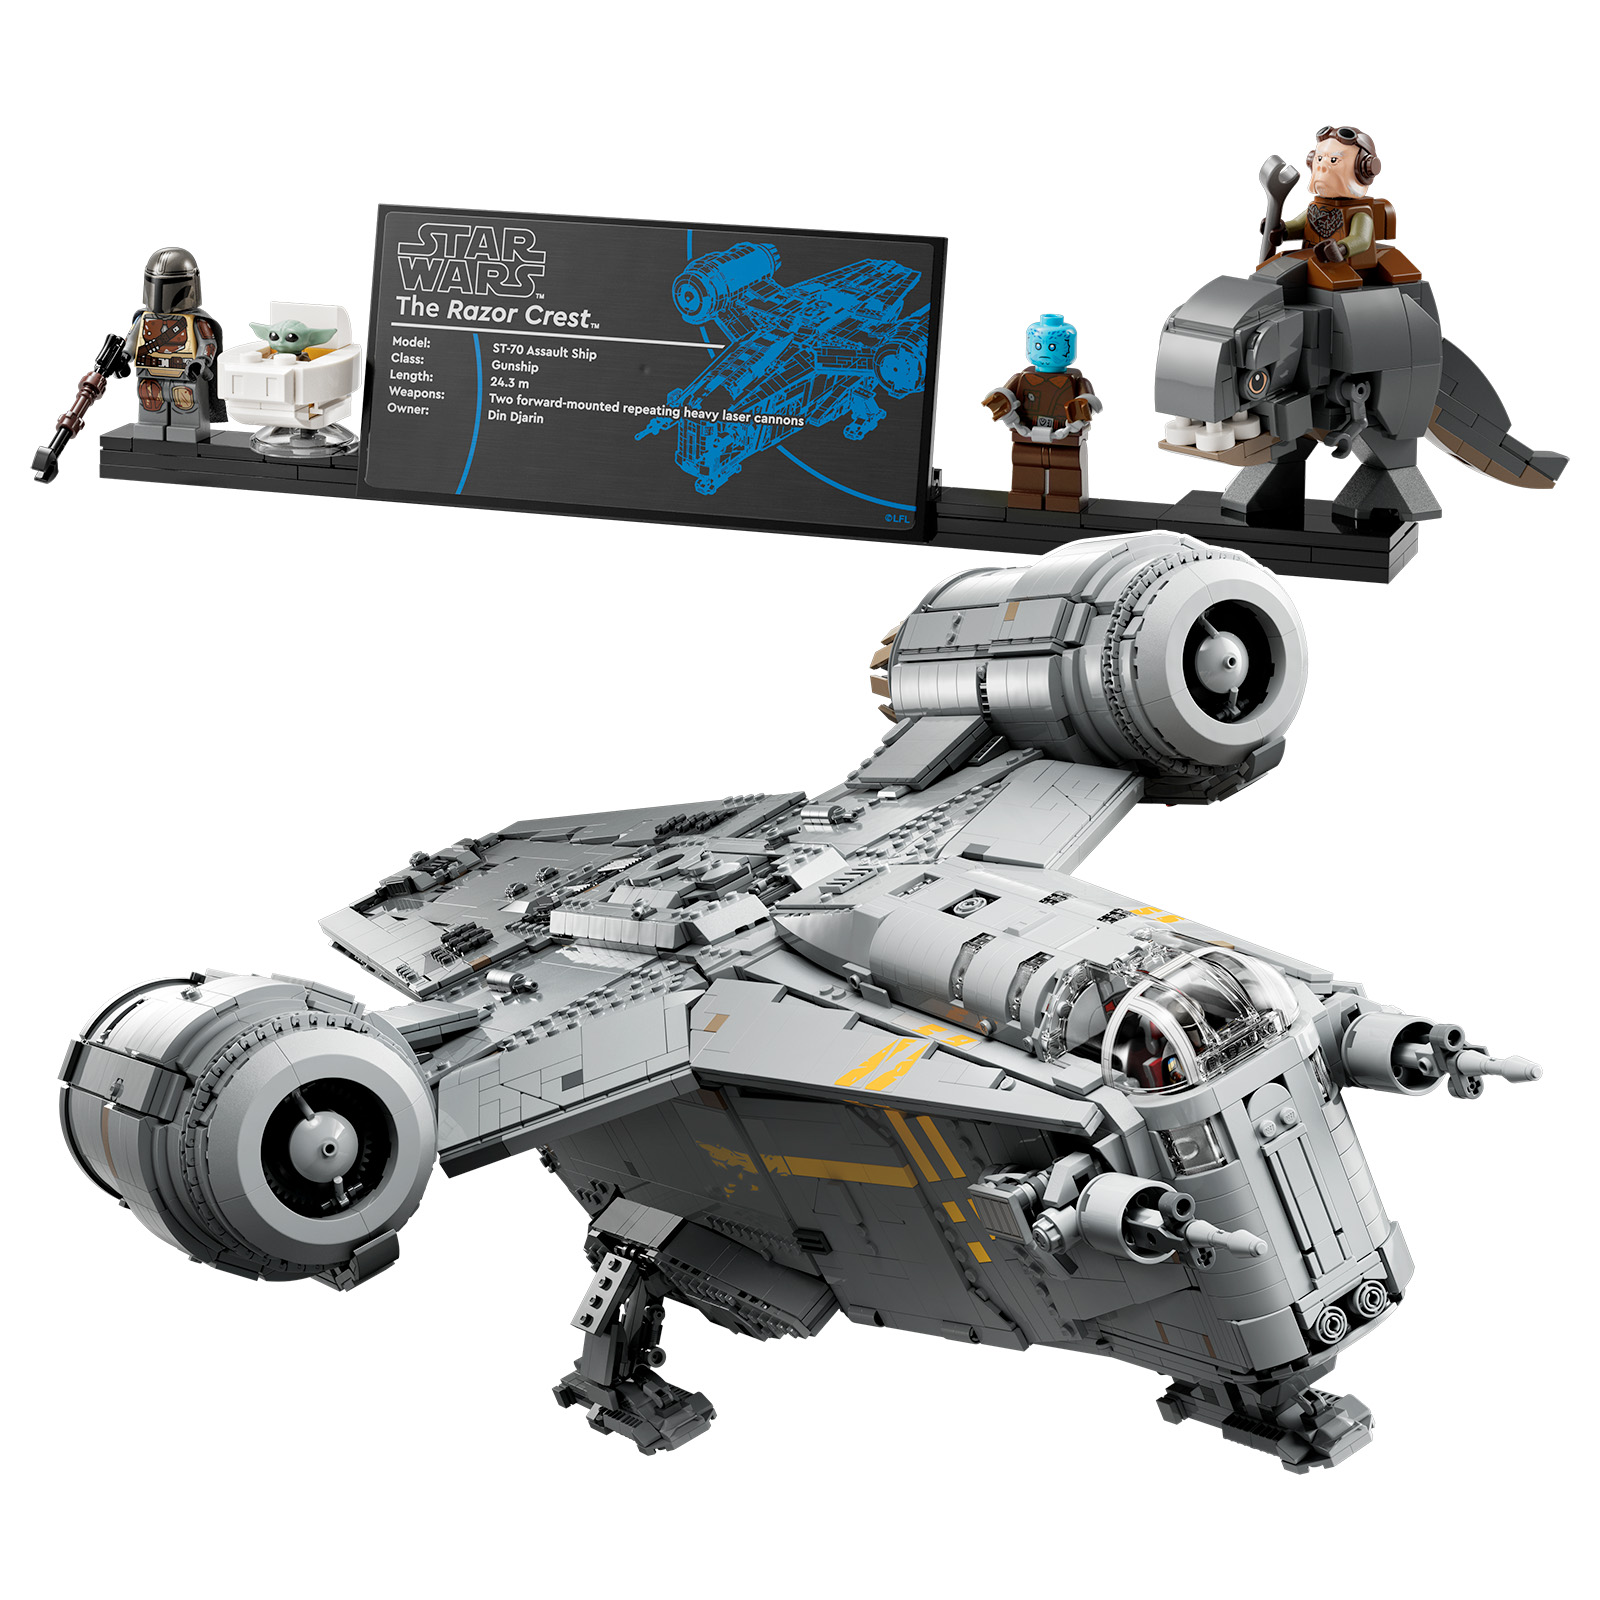 LEGO Star Wars Ultimate Collector Series sets: presentation plates soon to be pad-printed